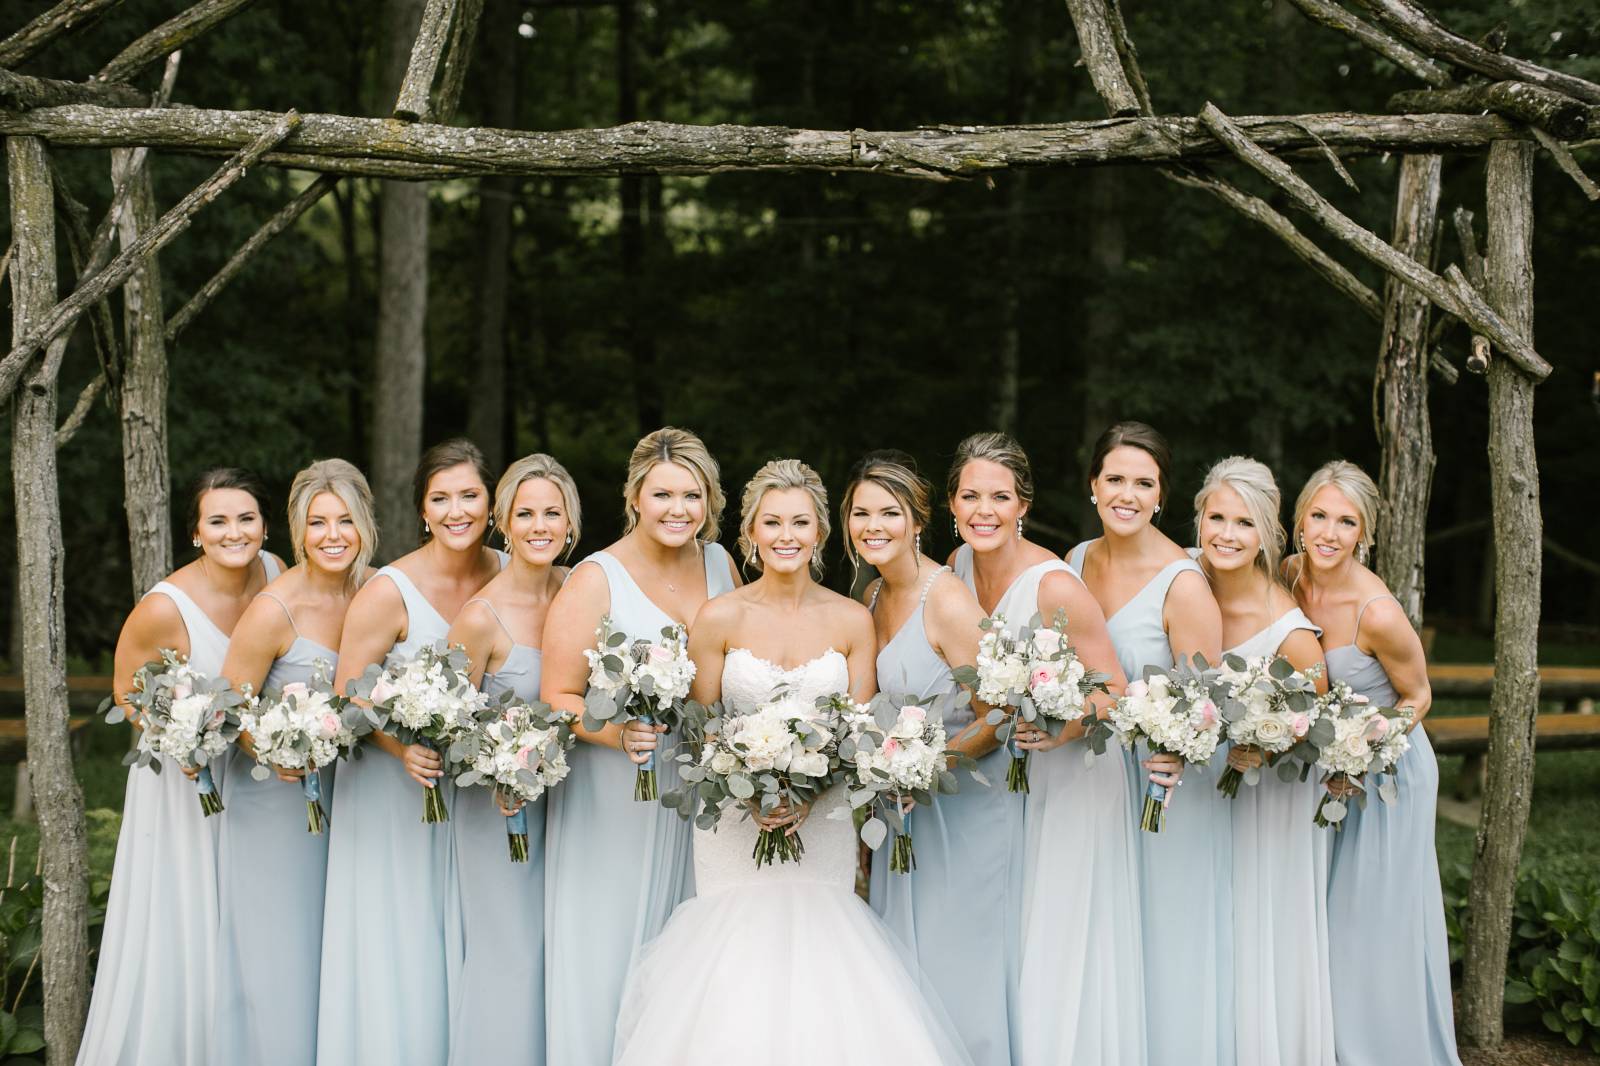 Walk Down the Aisle in Style with Bella Bridesmaids – Nashville’s Exclusive Bridesmaid Dress Shop